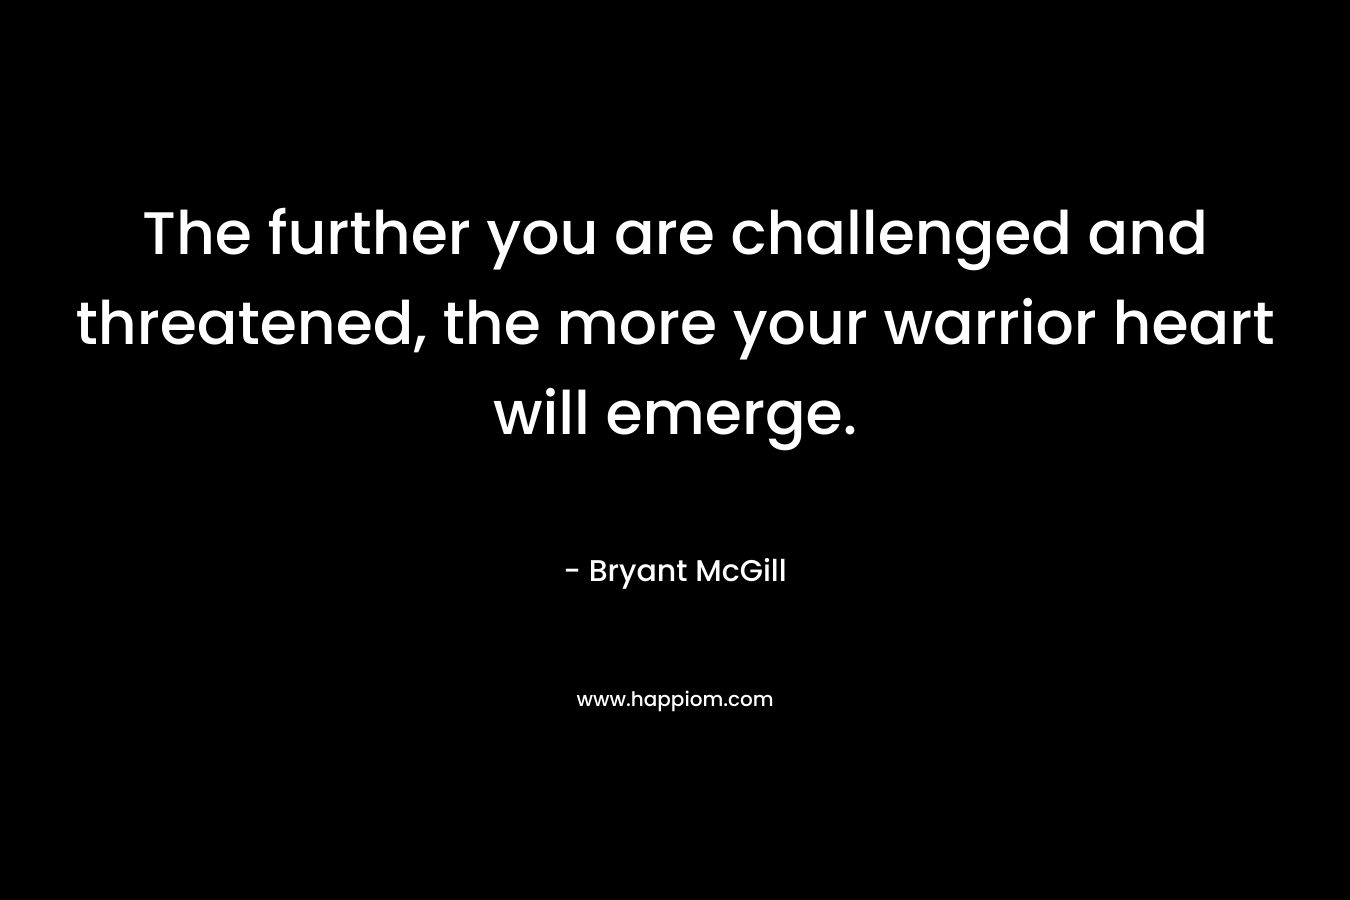 The further you are challenged and threatened, the more your warrior heart will emerge. – Bryant McGill